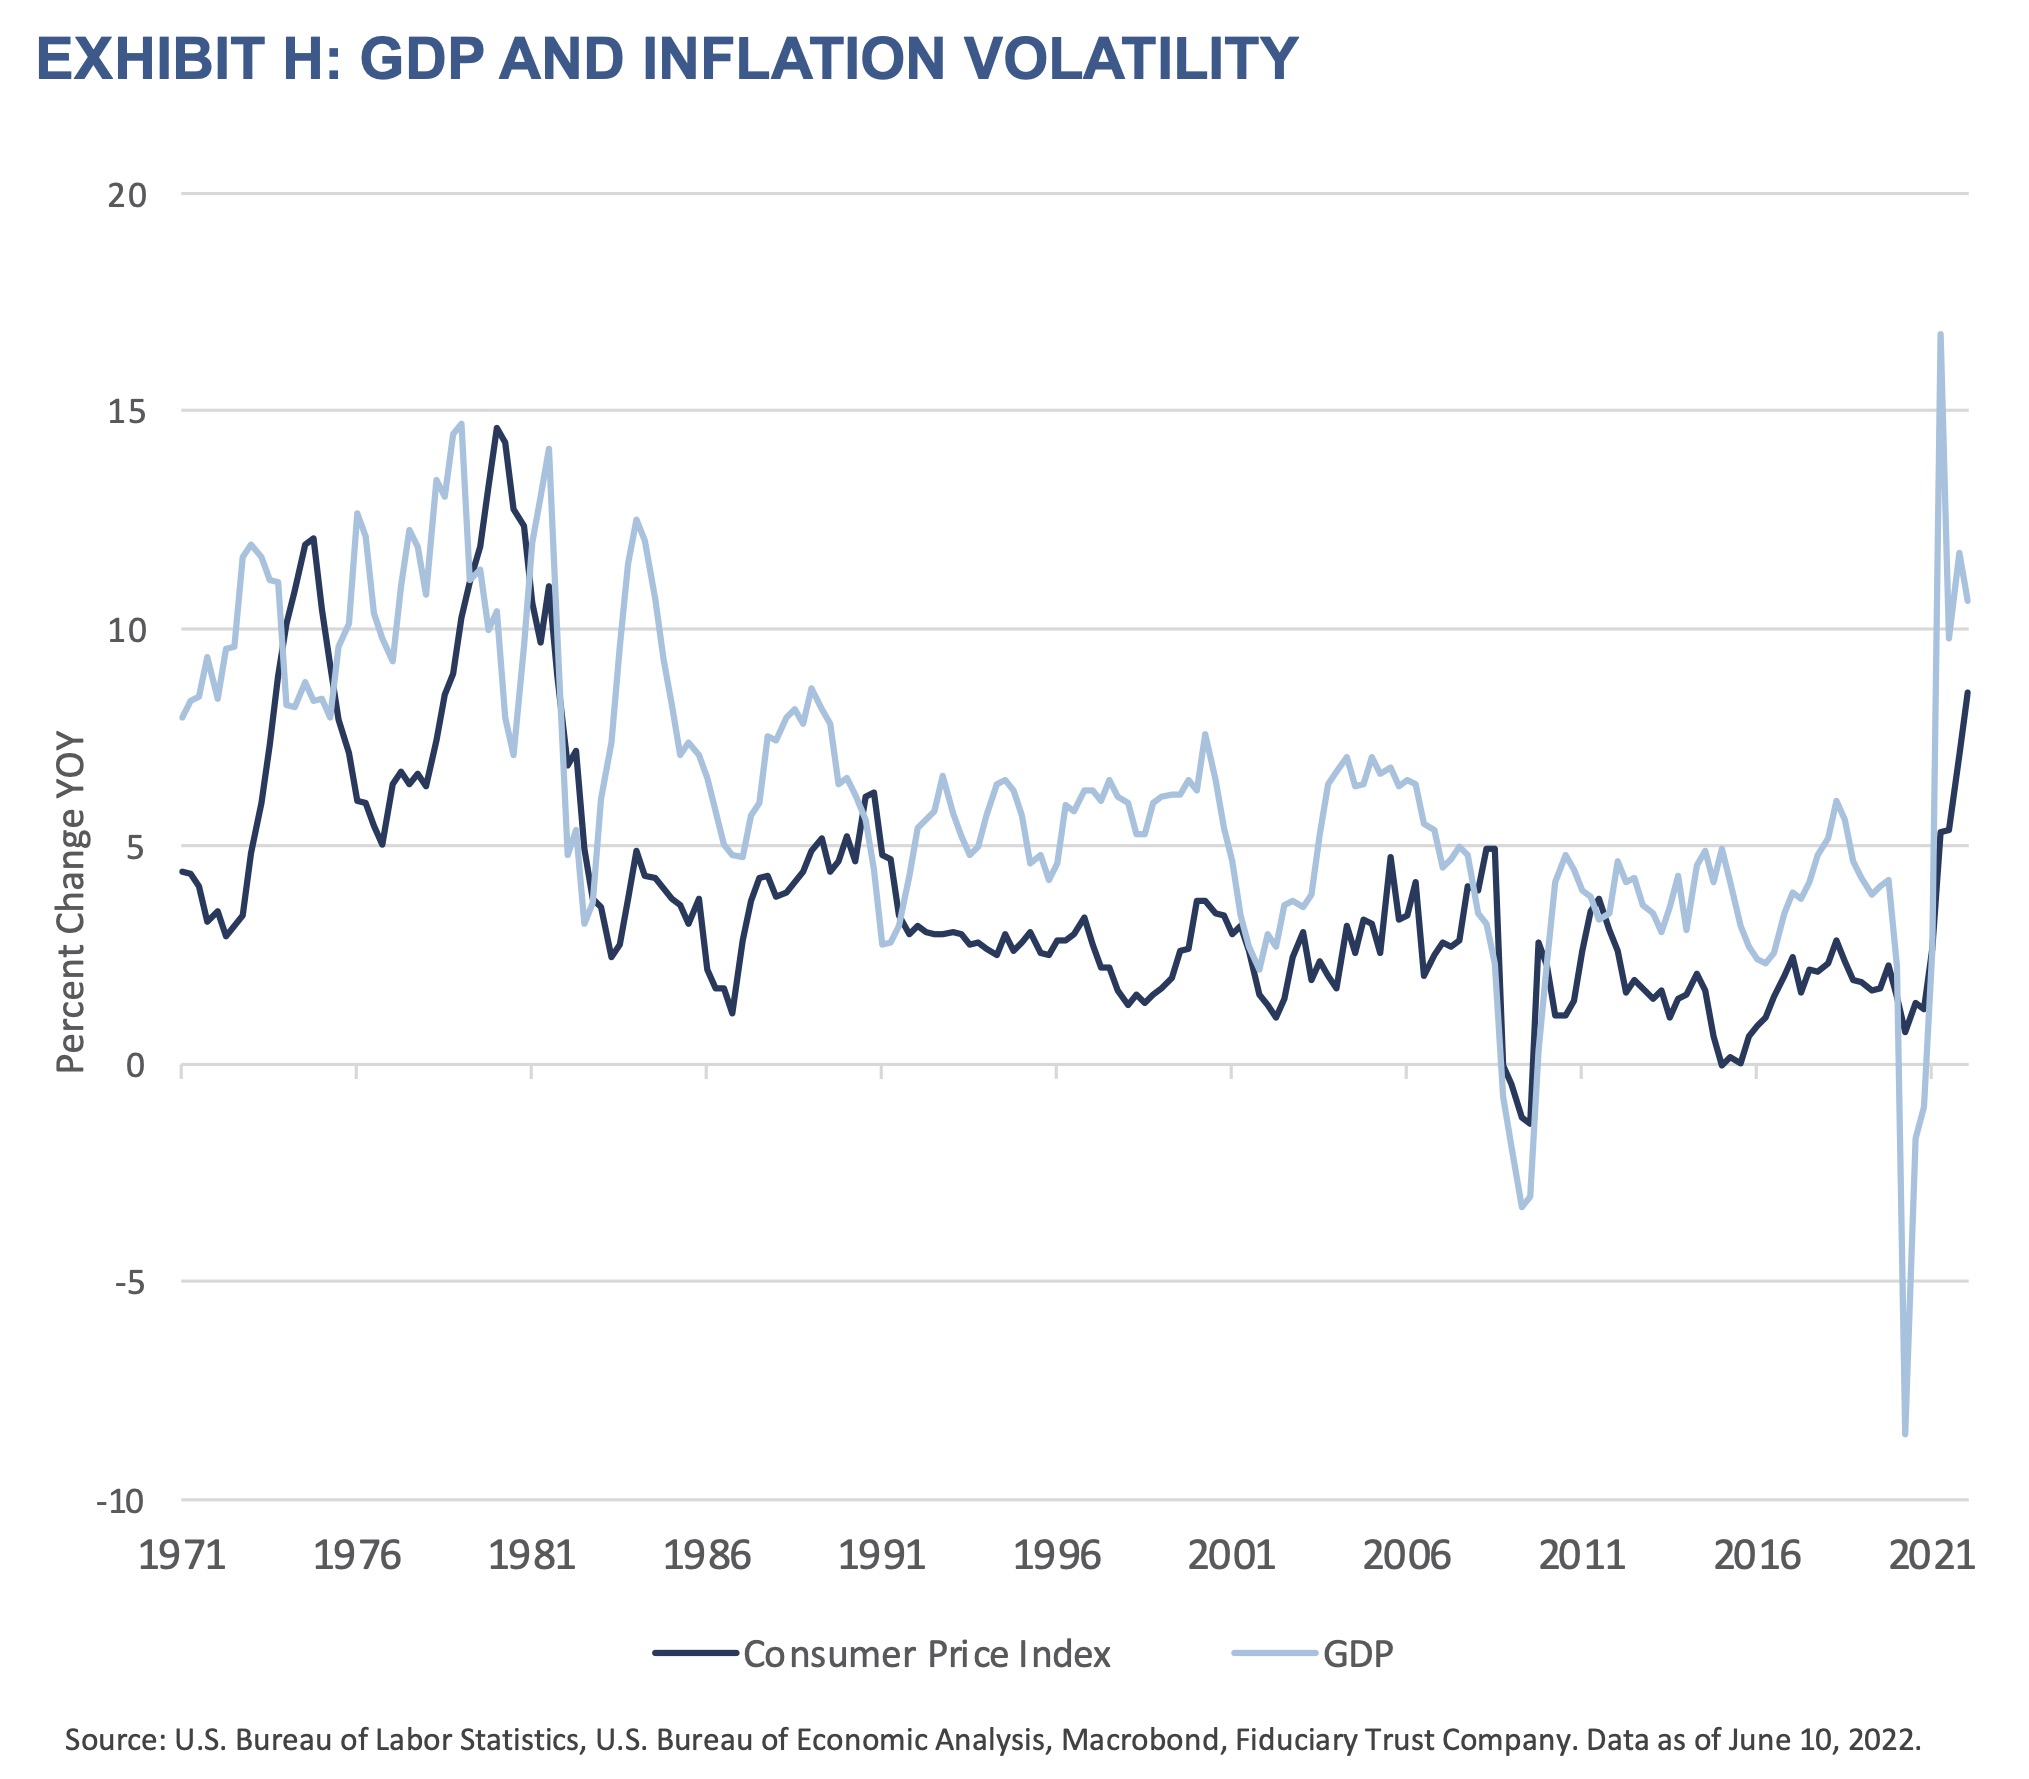 2022 Q3 Outlook - Exhibit H - GDP and Inflation Volatility